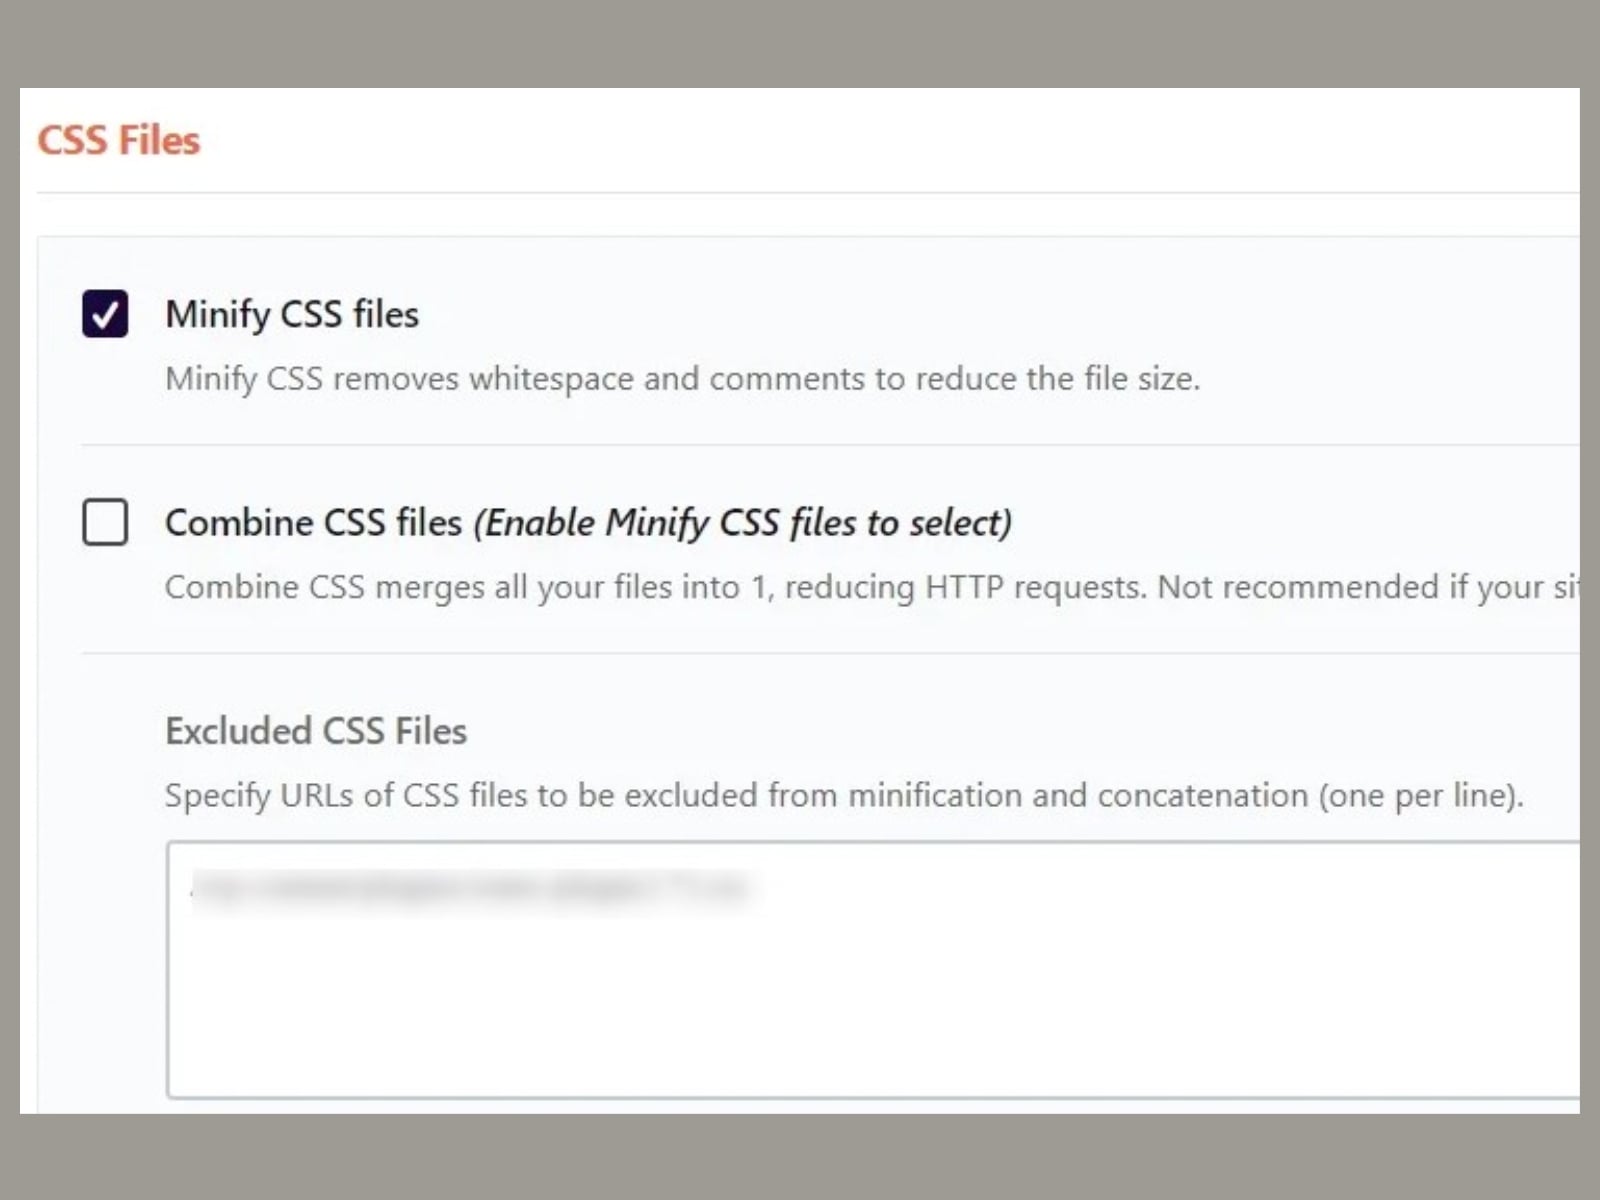 File optimization tab to optimize CSS files for the WP Rocket review.